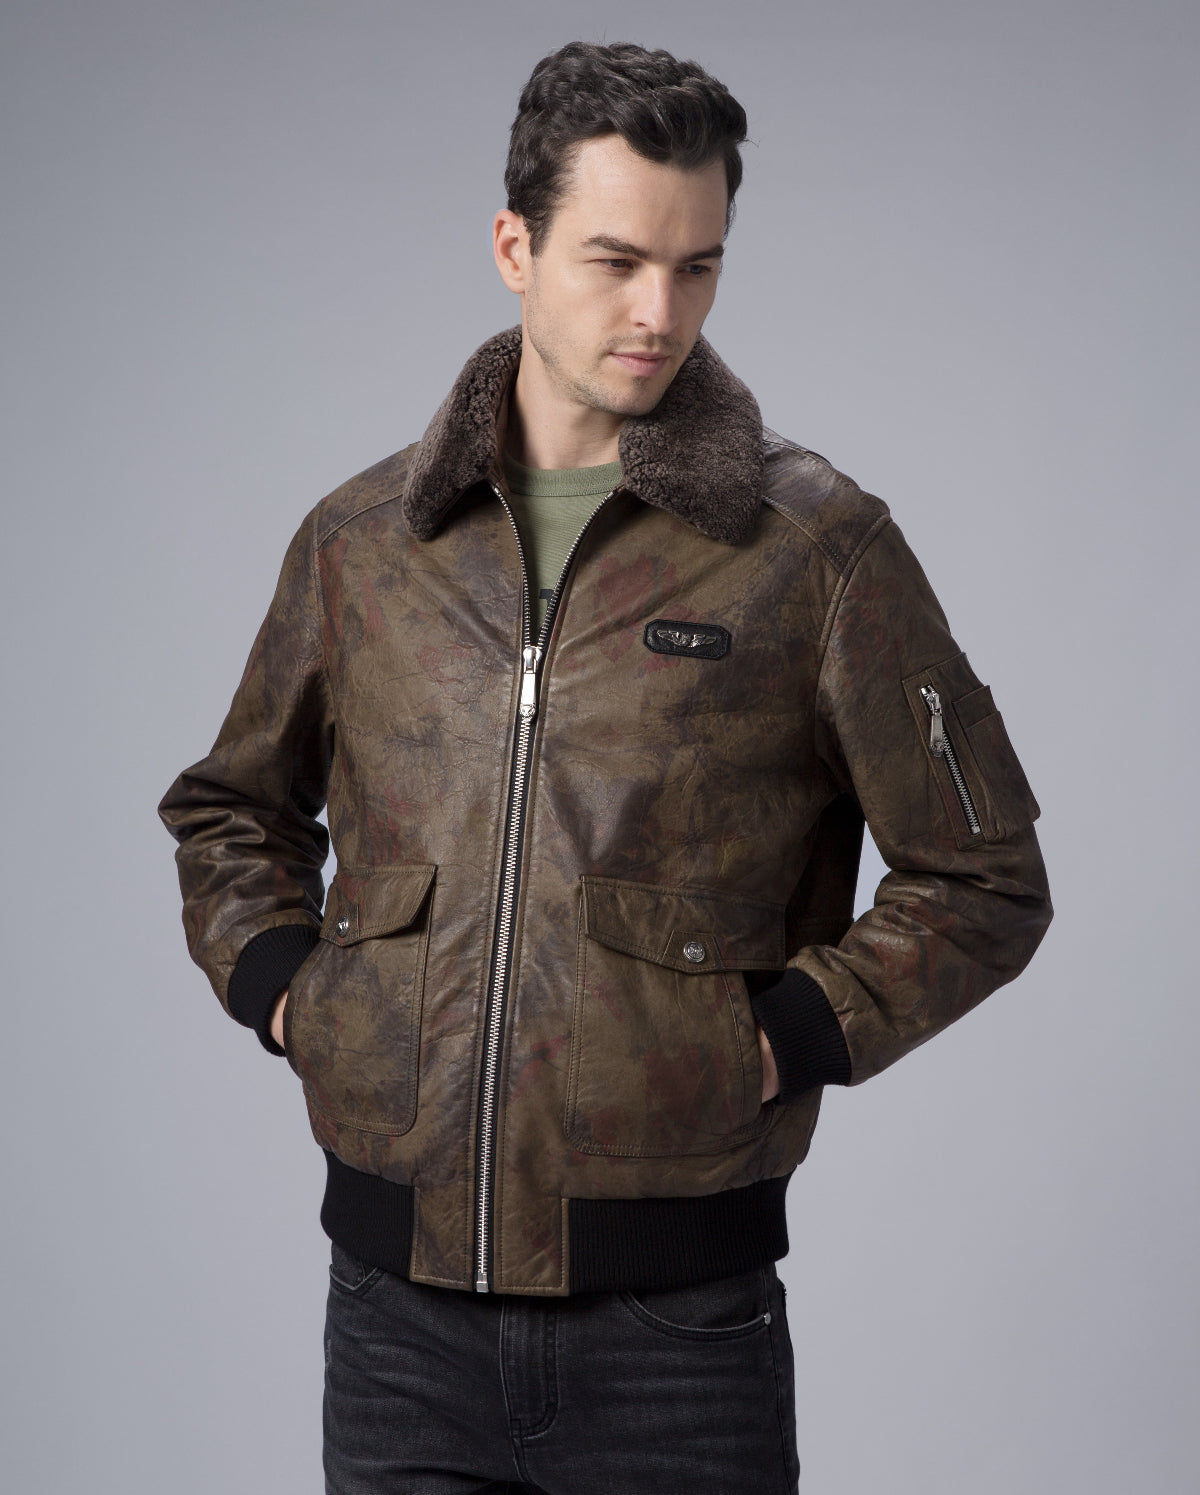 Green G-1 Navy Leather Flight Jacket with Removable Fur Collar